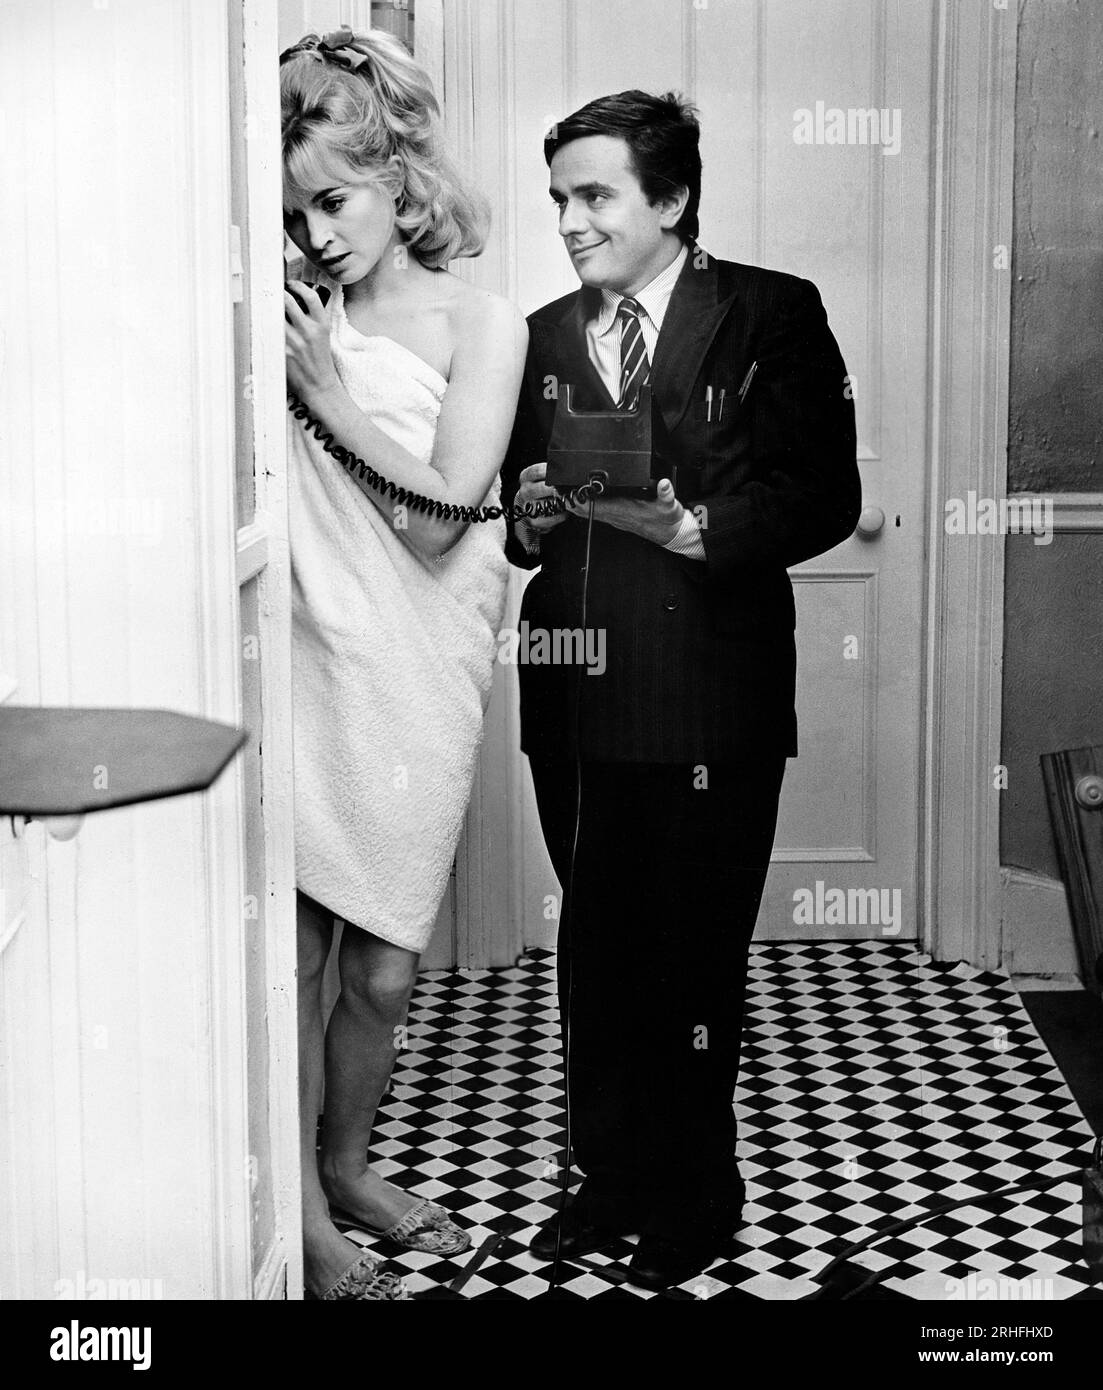 Suzy Kendall, Dudley Moore, on-set of the British Film, '30 Is A Dangerous Age, Cynthia', Columbia Pictures, 1968 Stock Photo